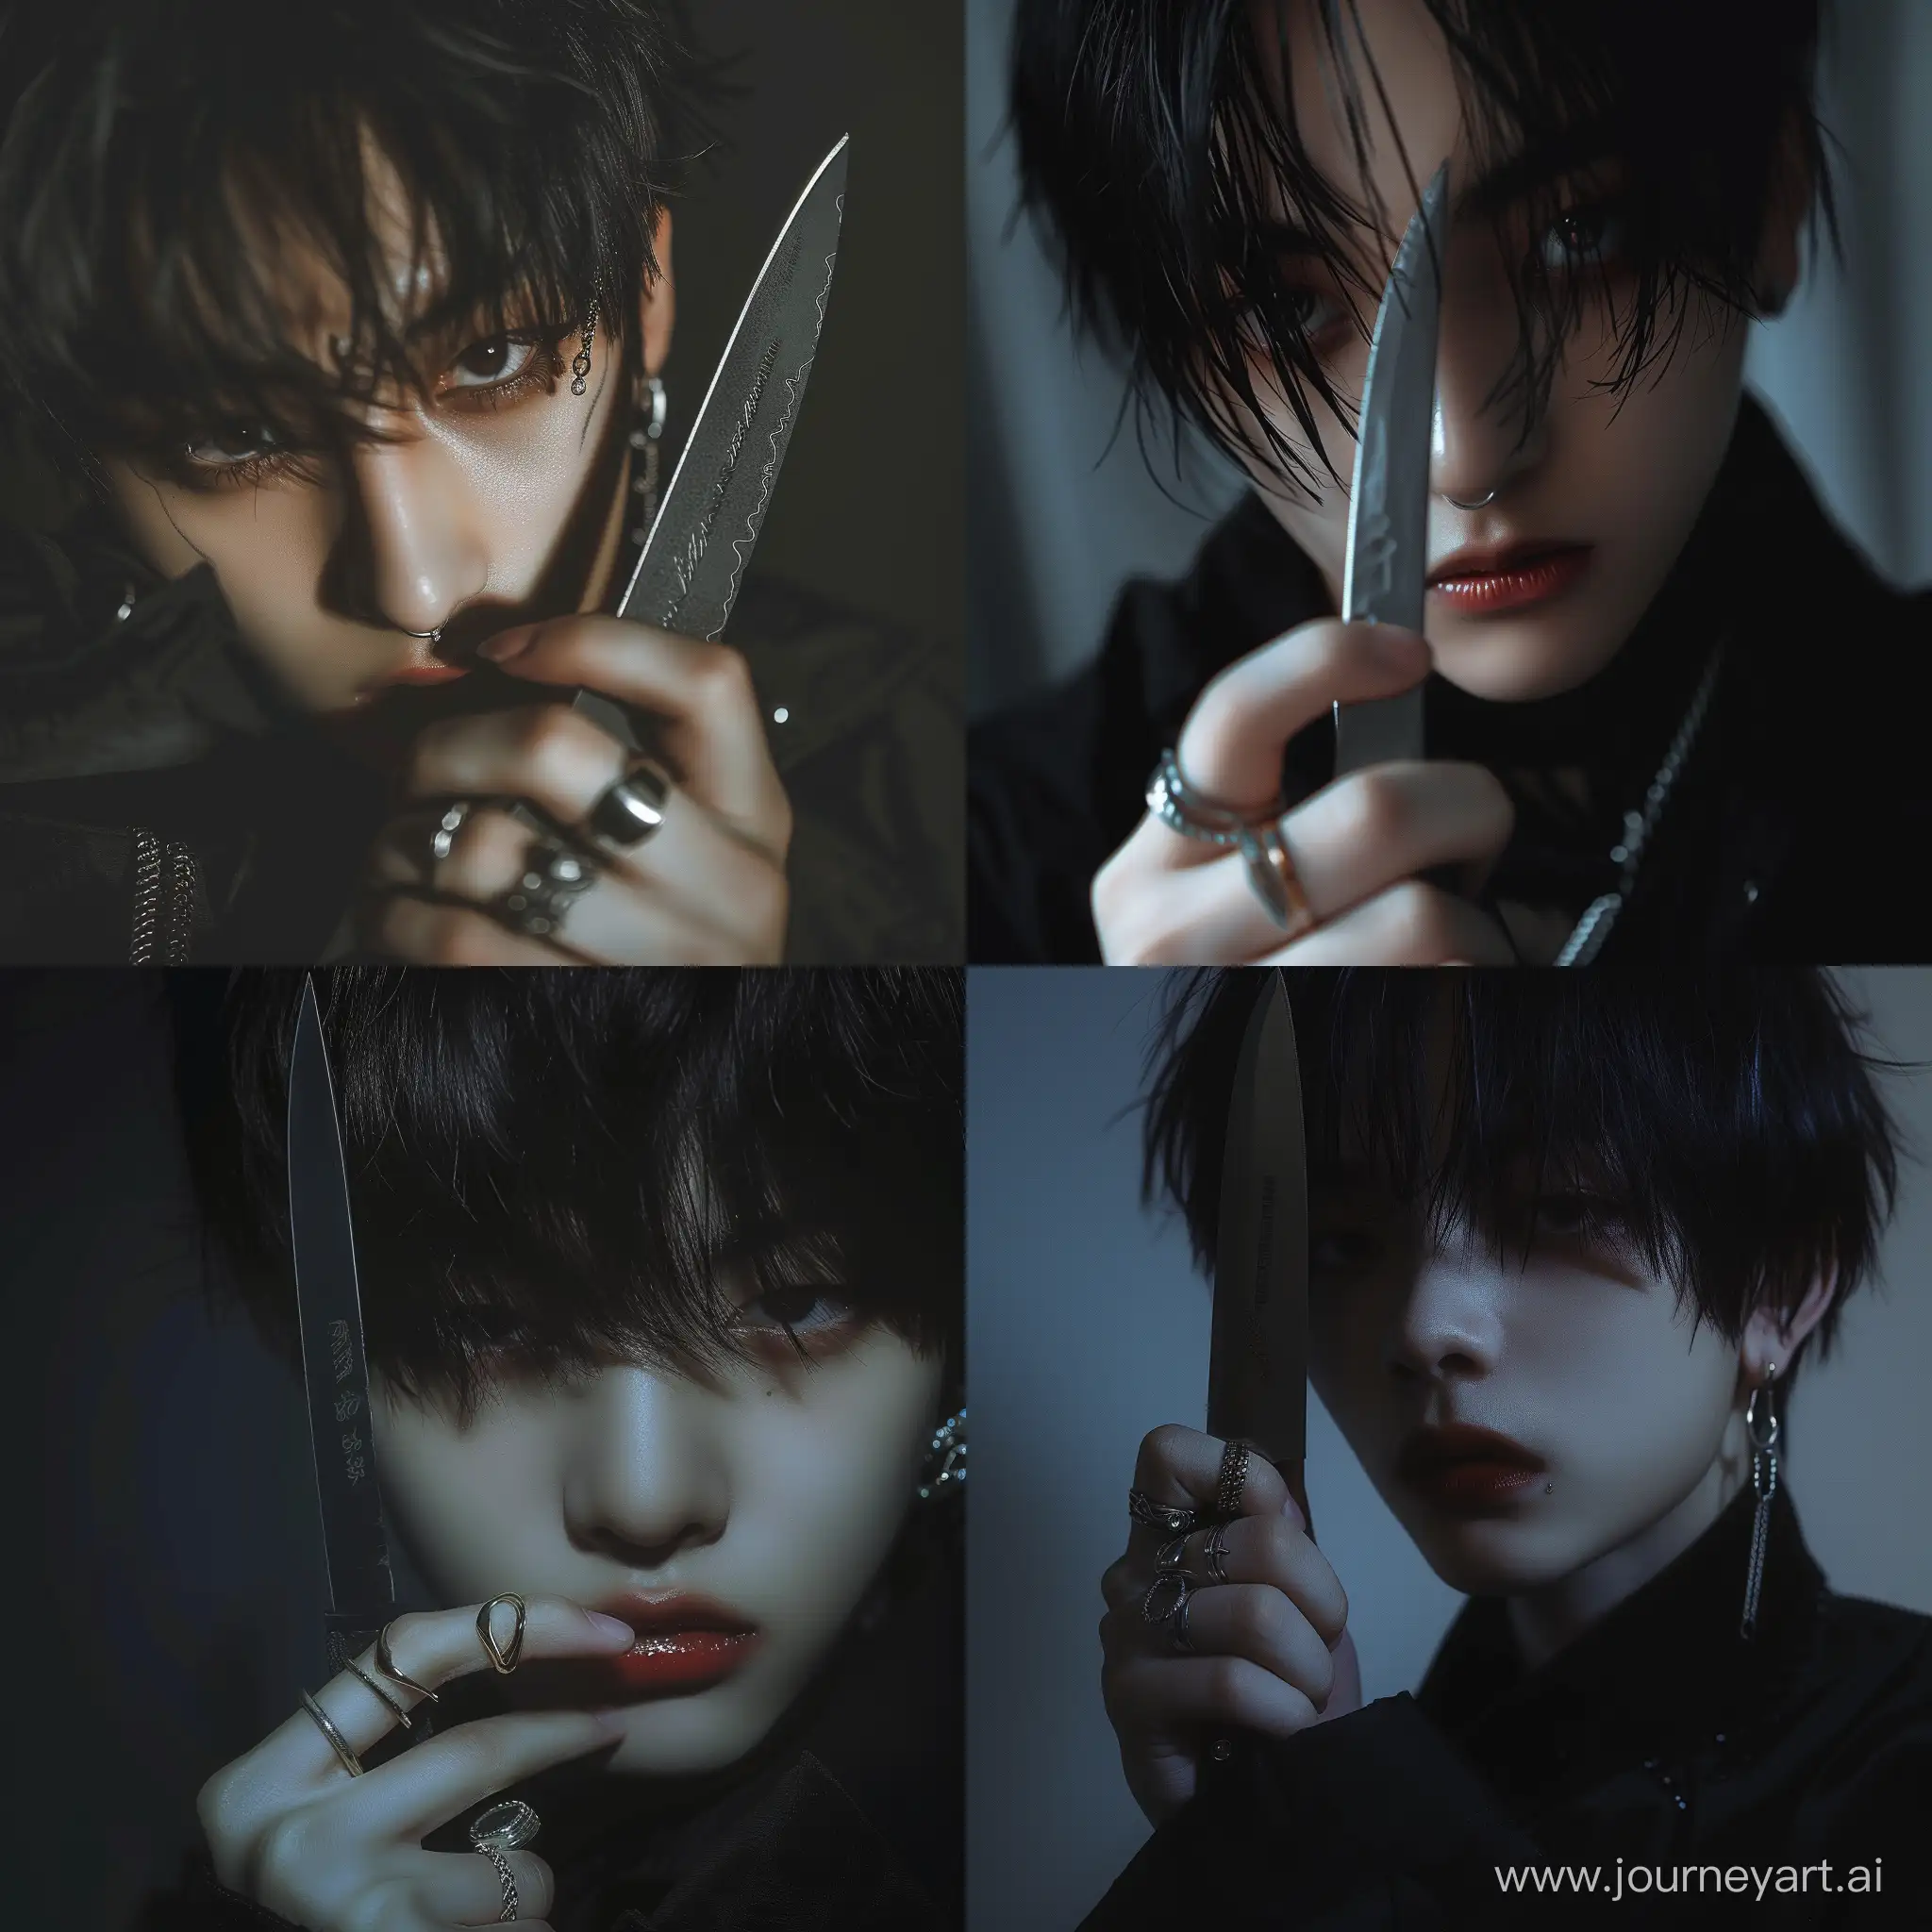 Aesthetic-Teenager-with-Knife-Portrait-of-an-Expressionless-18YearOld-in-Black-Attire